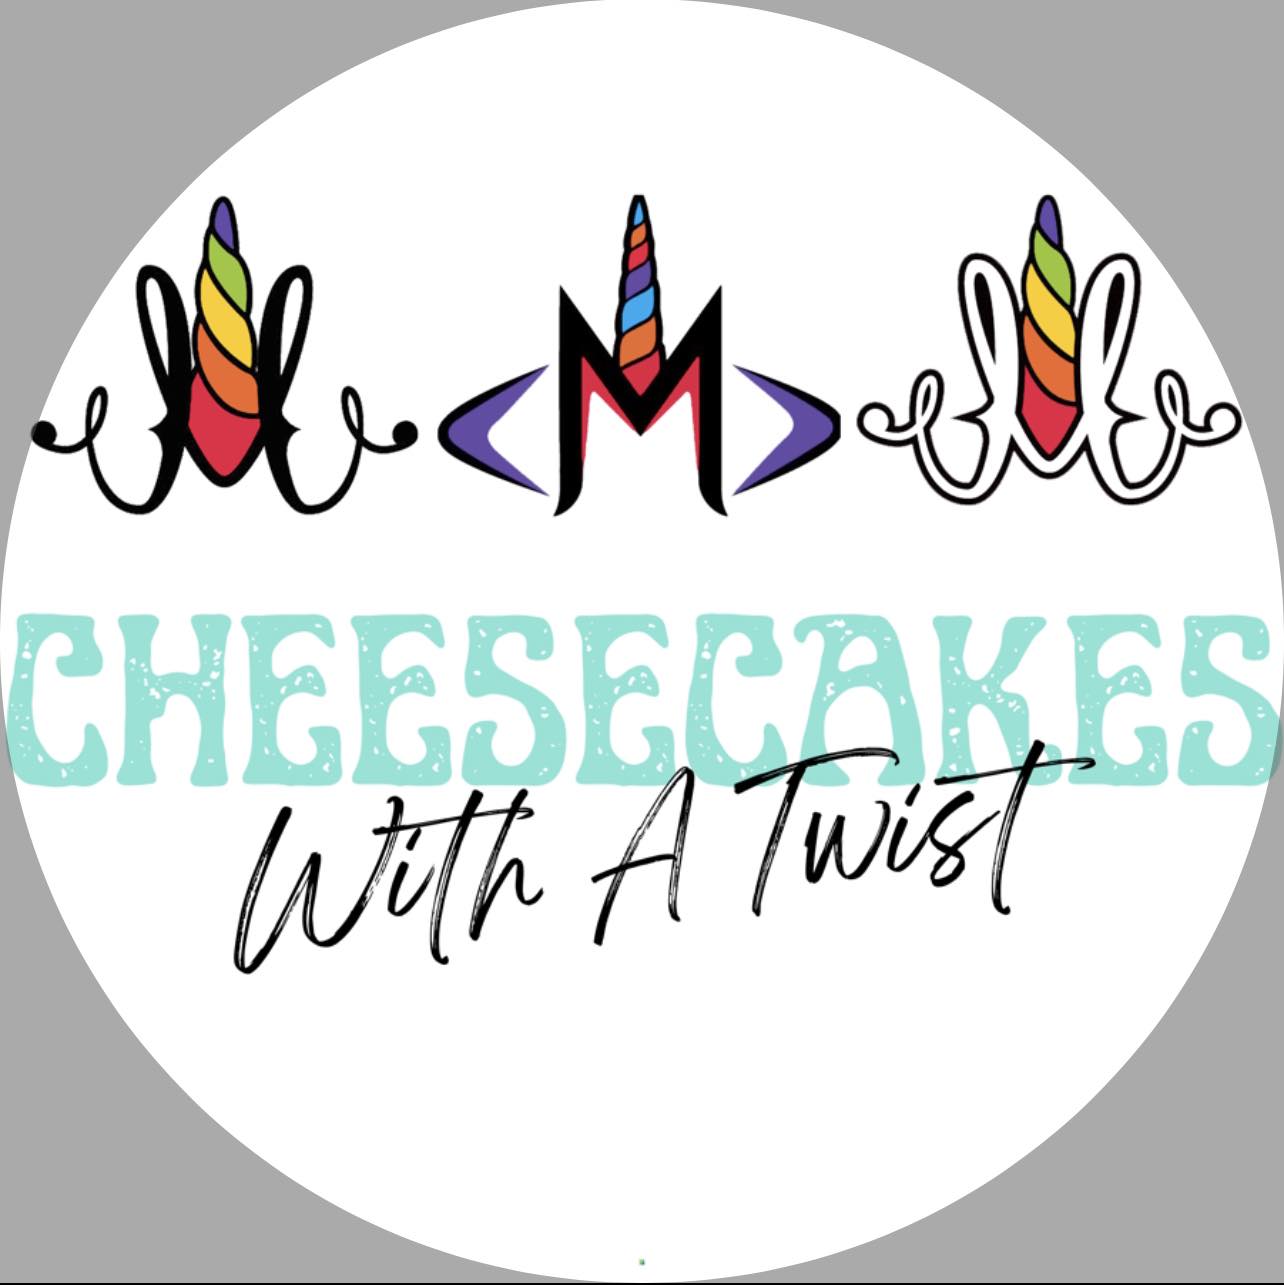 Cheesecakes With a Twist Logo